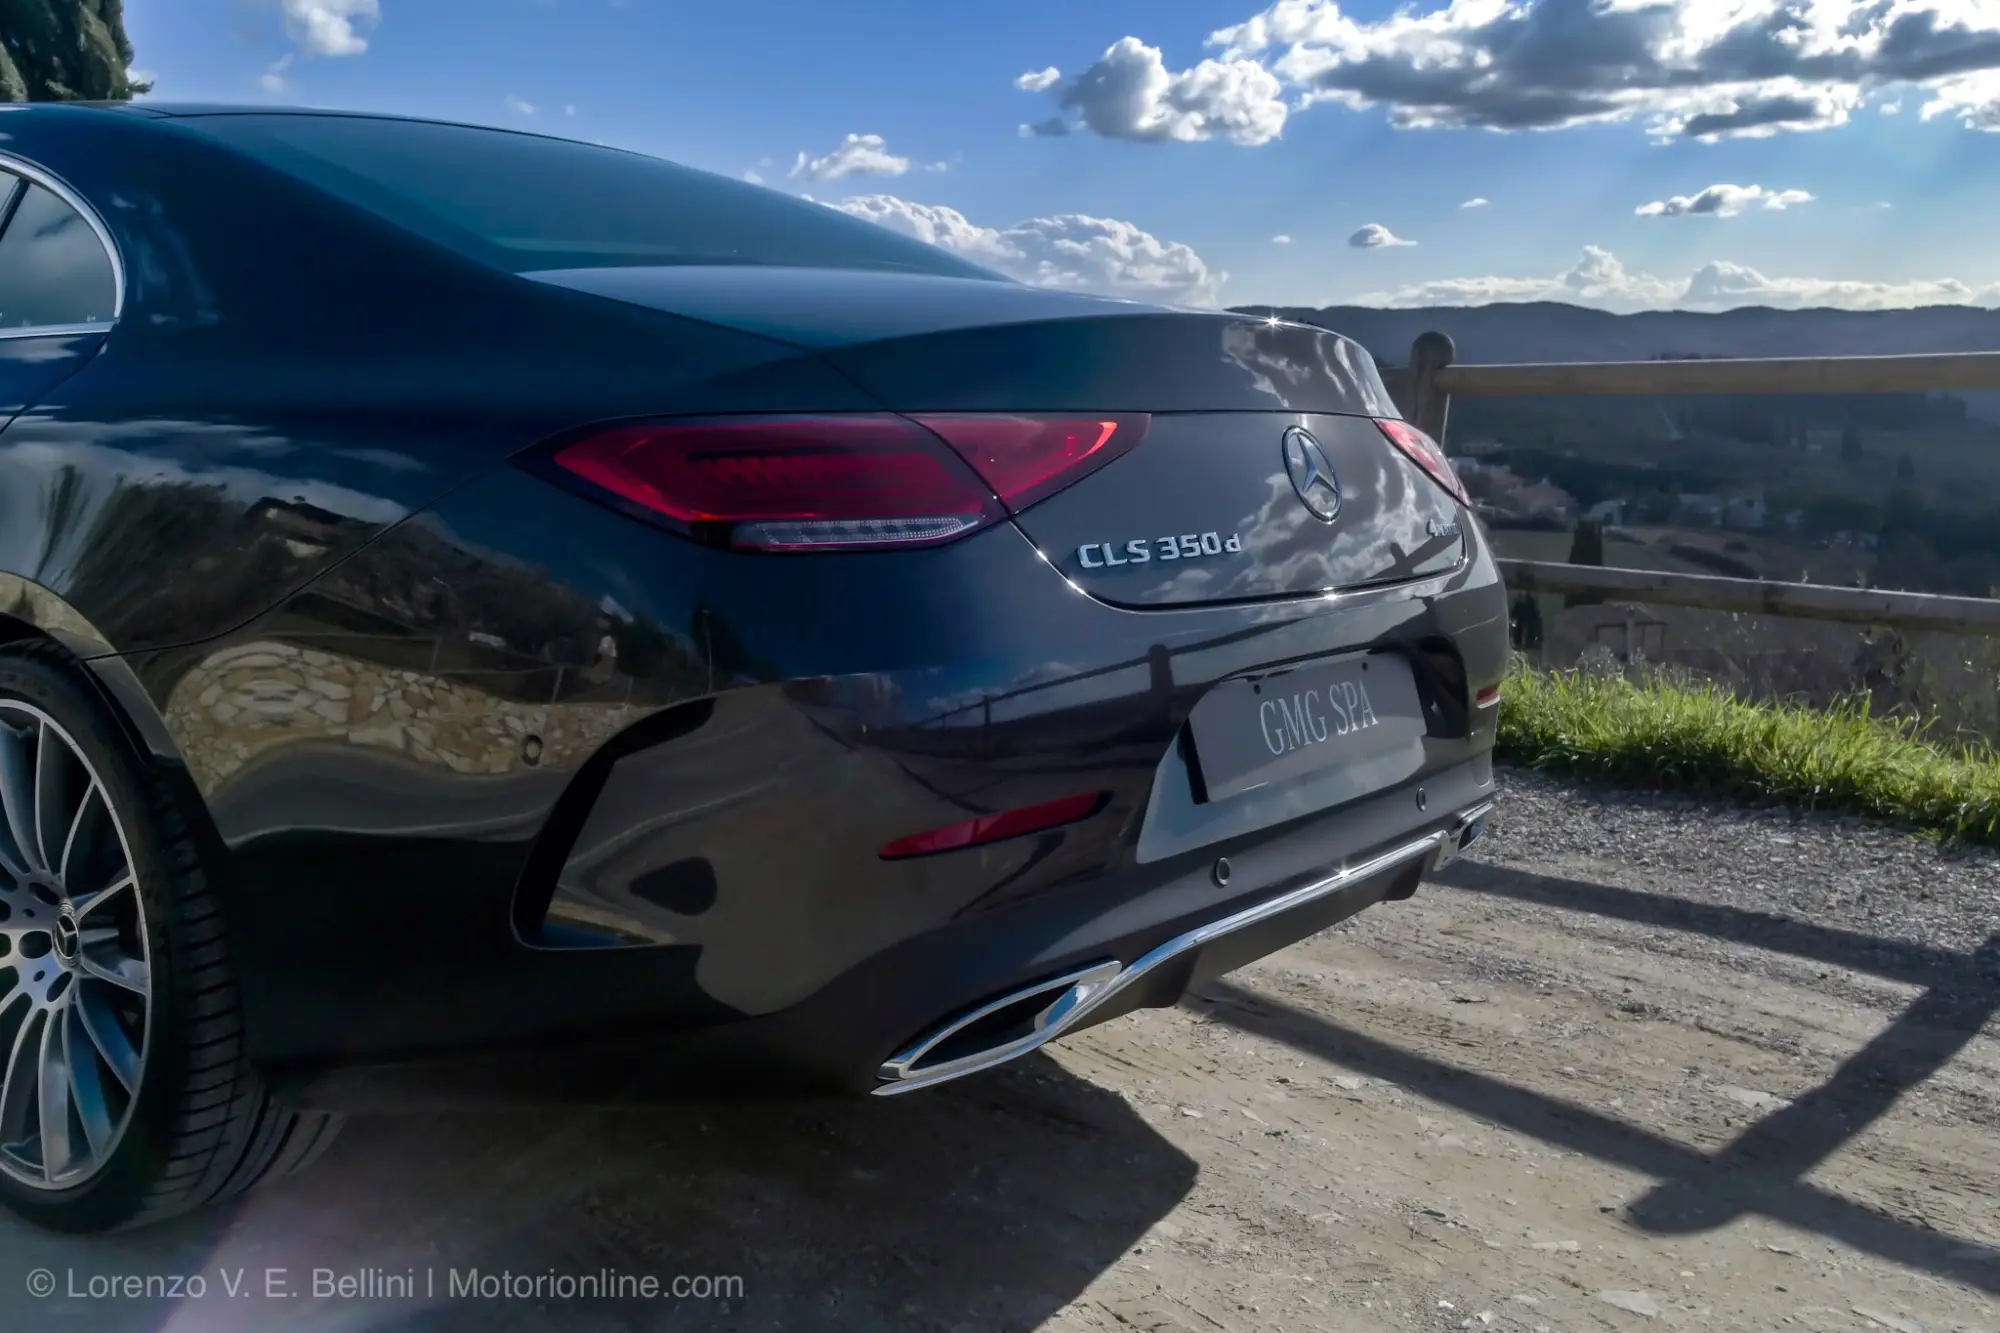 Nuova Mercedes CLS MY 2018 - Test Drive in Anteprima - 9